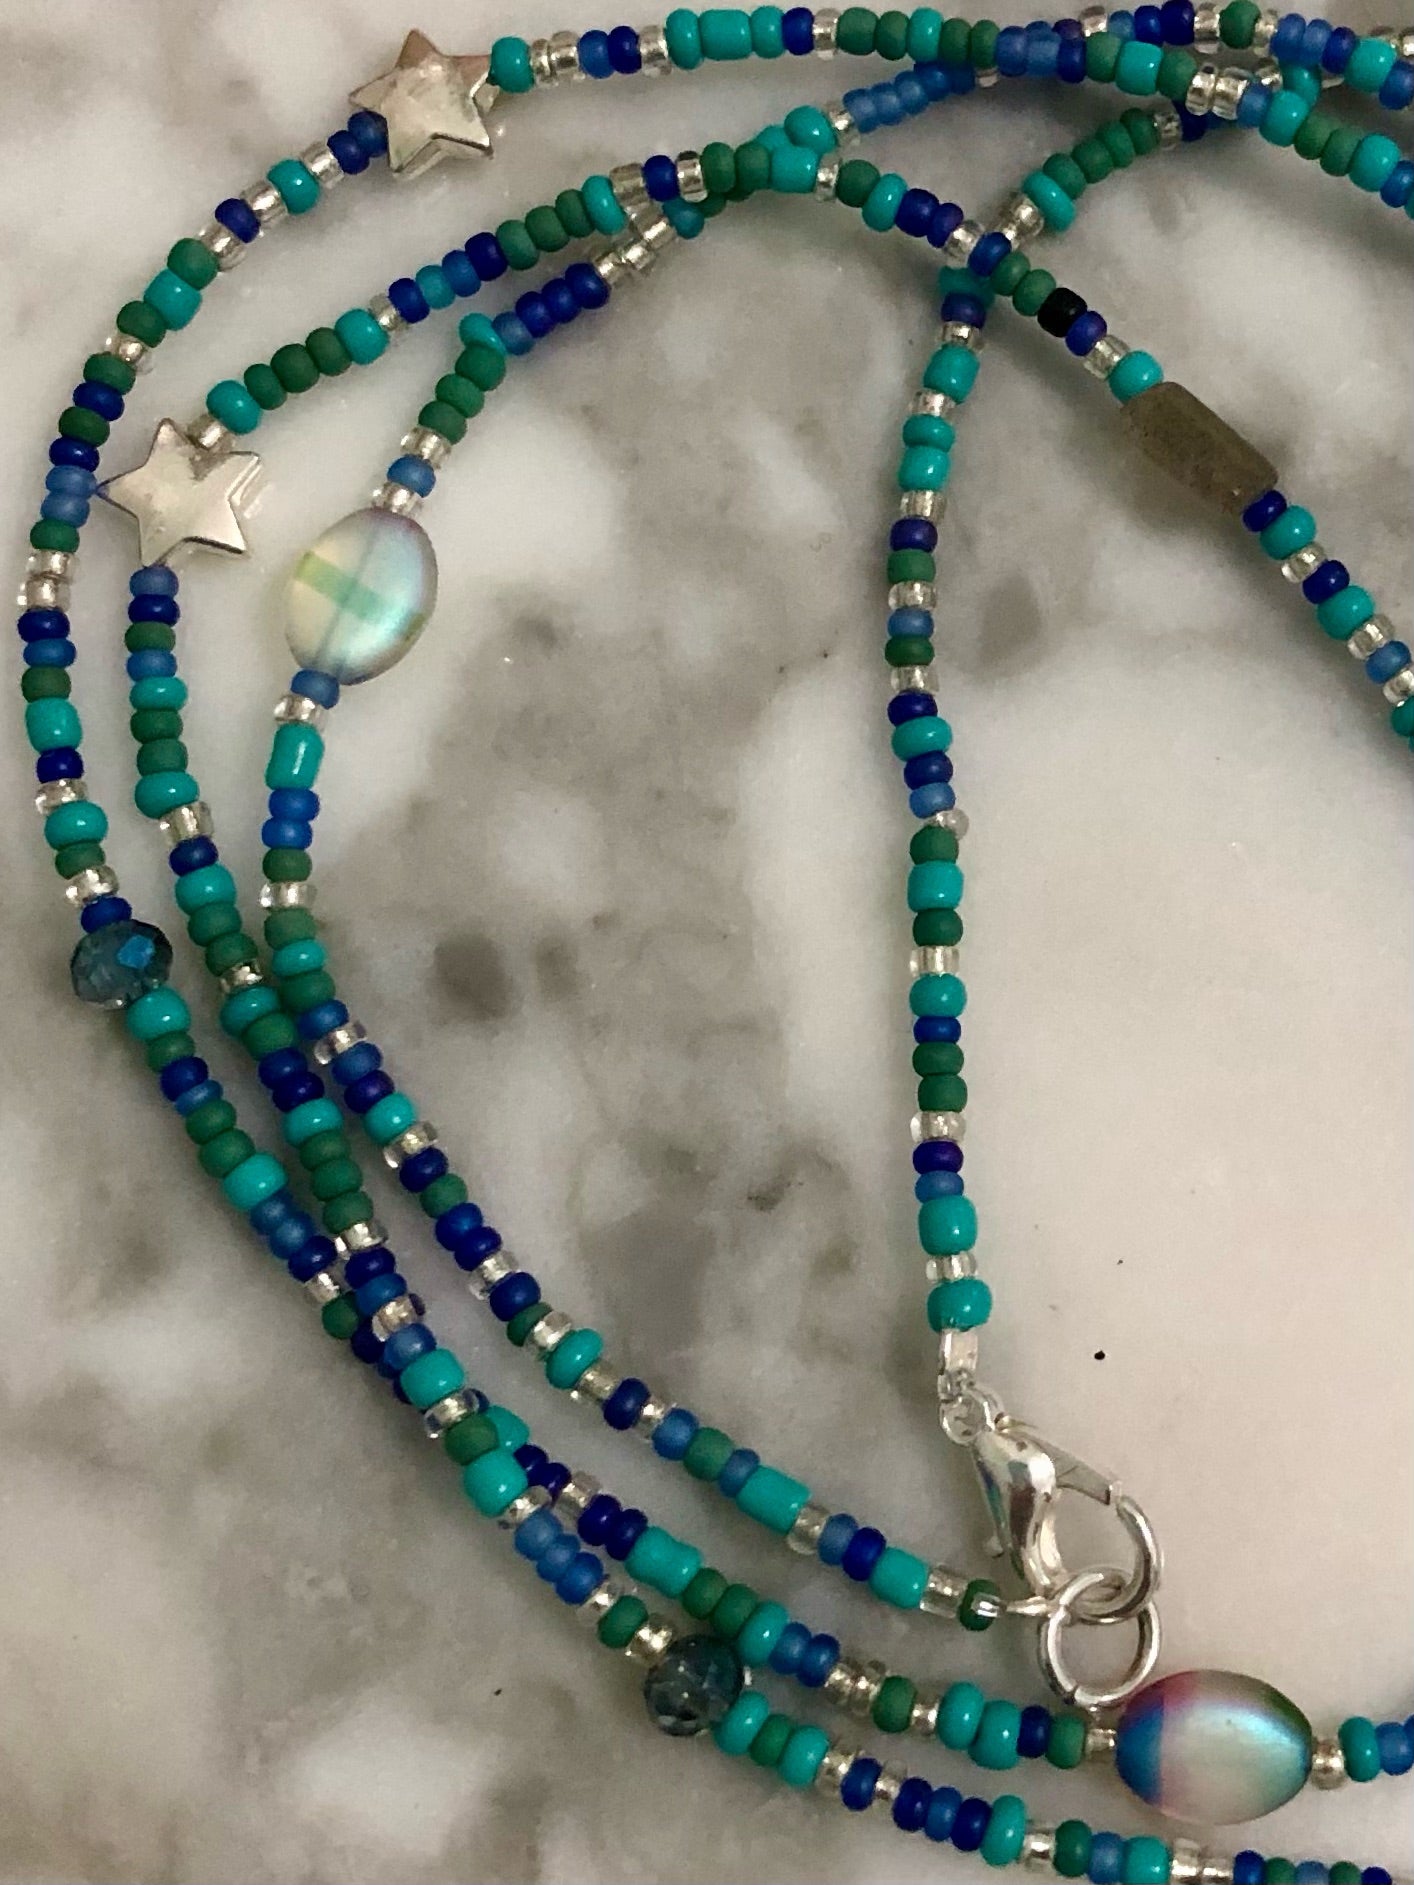 Waist beads in blue, green, and silver glass seed beads, silver plated star beads, multi-colored glass beads, and labradorite beads on elastic cord with a silver plated clasp.